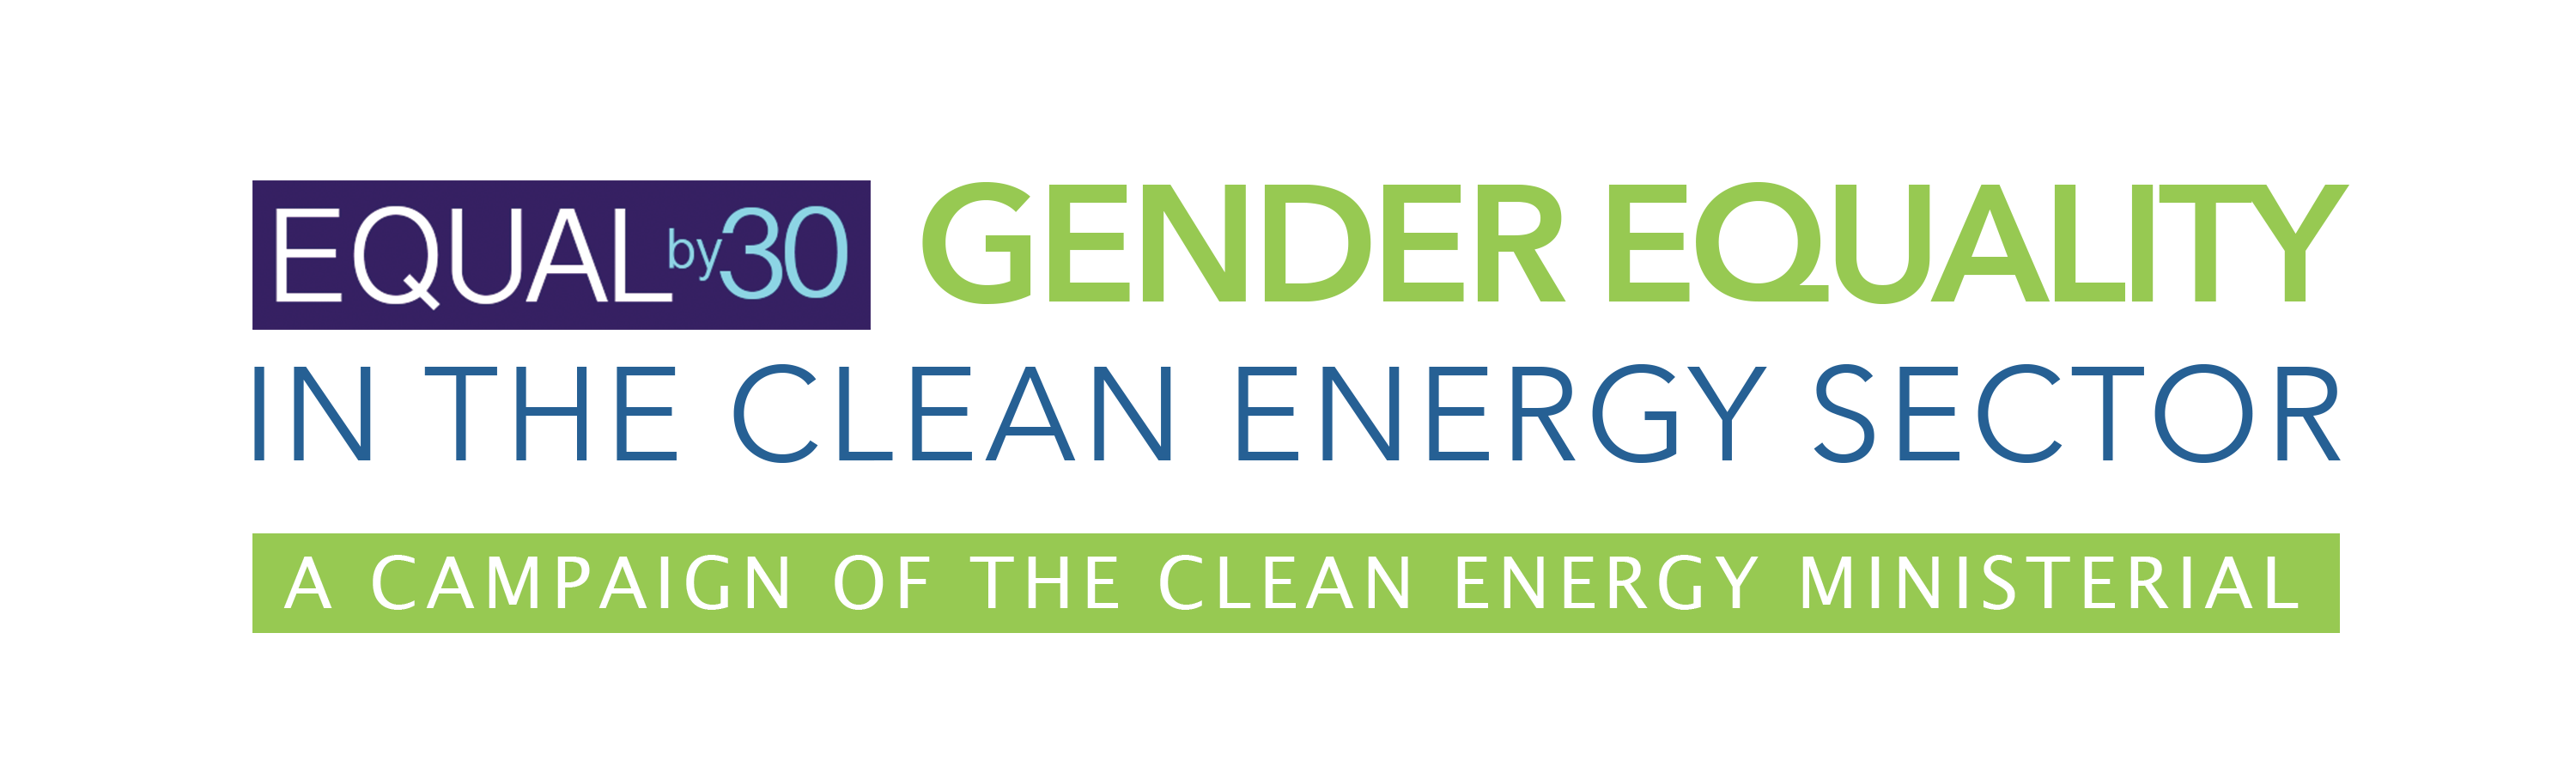 clean energy ministerial contact